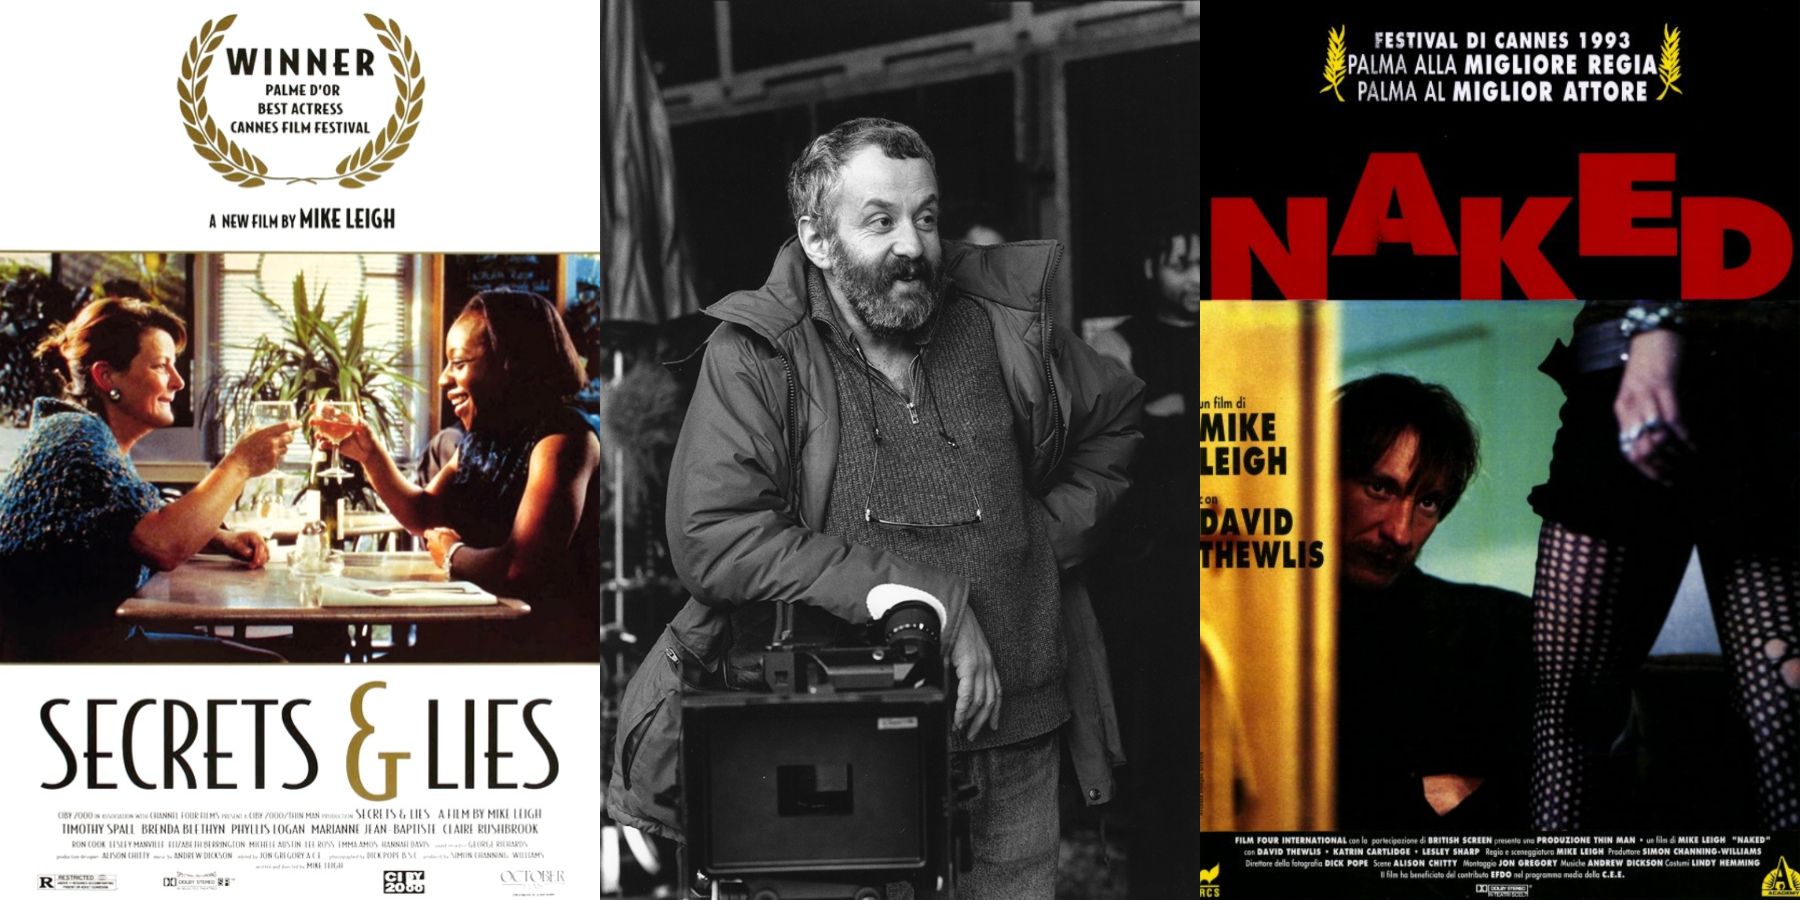 Split image of director Mike Leigh and posters for Secrets Lies and Naked